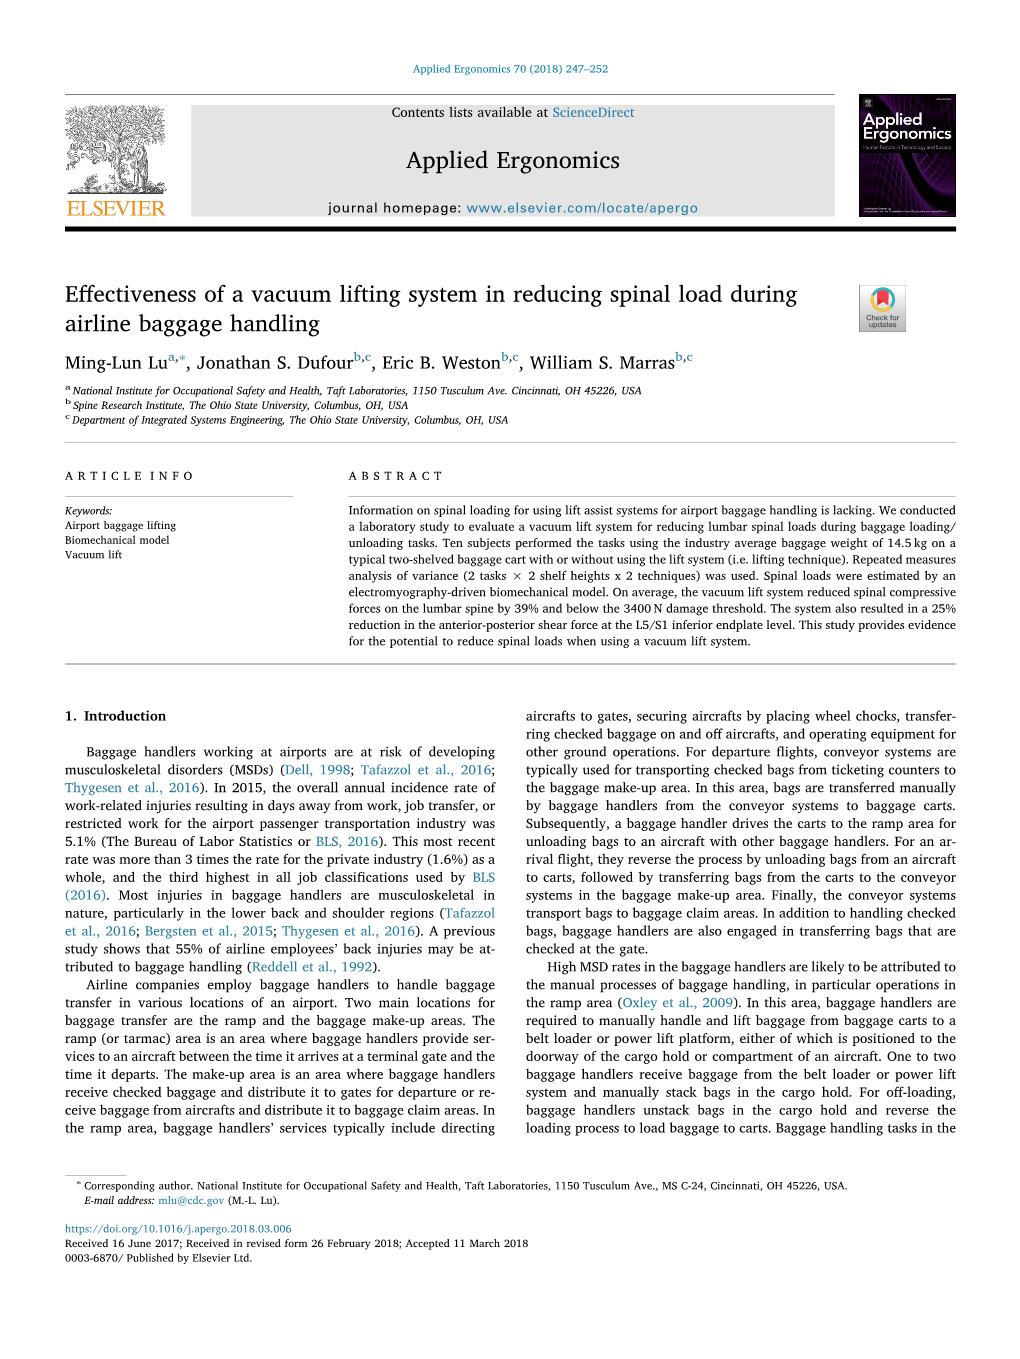 Effectiveness of a Vacuum Lifting System in Reducing Spinal Load